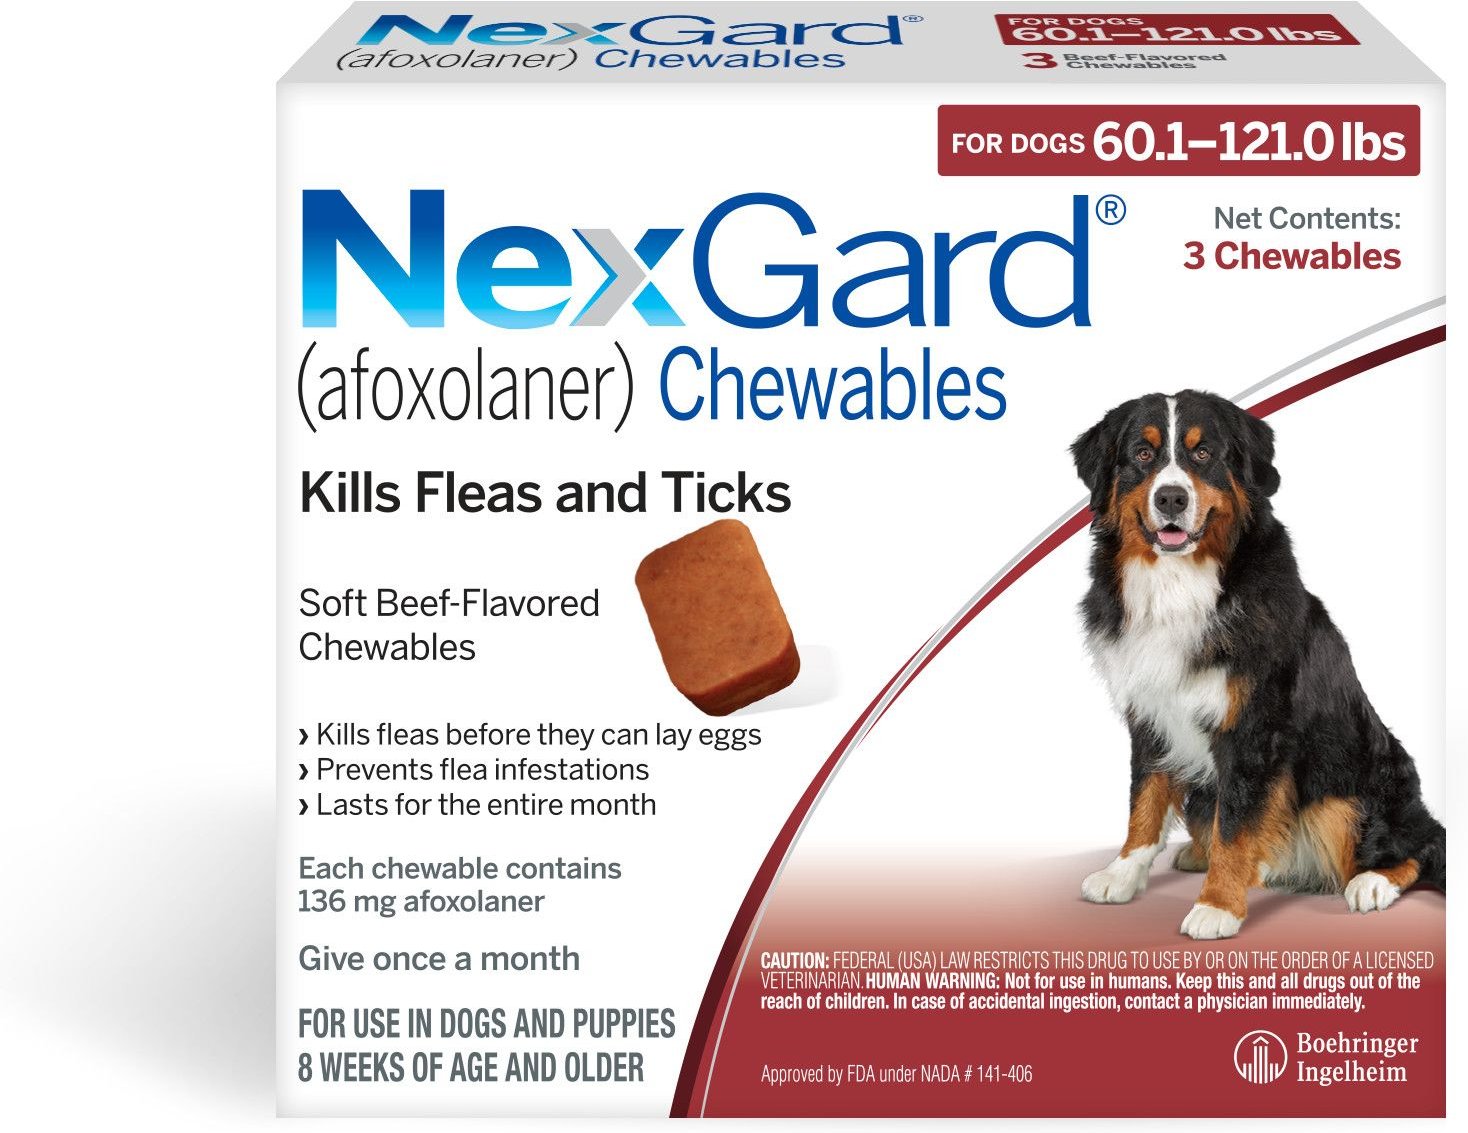 NEXGARD Chewables for Dogs, 60.1-121 